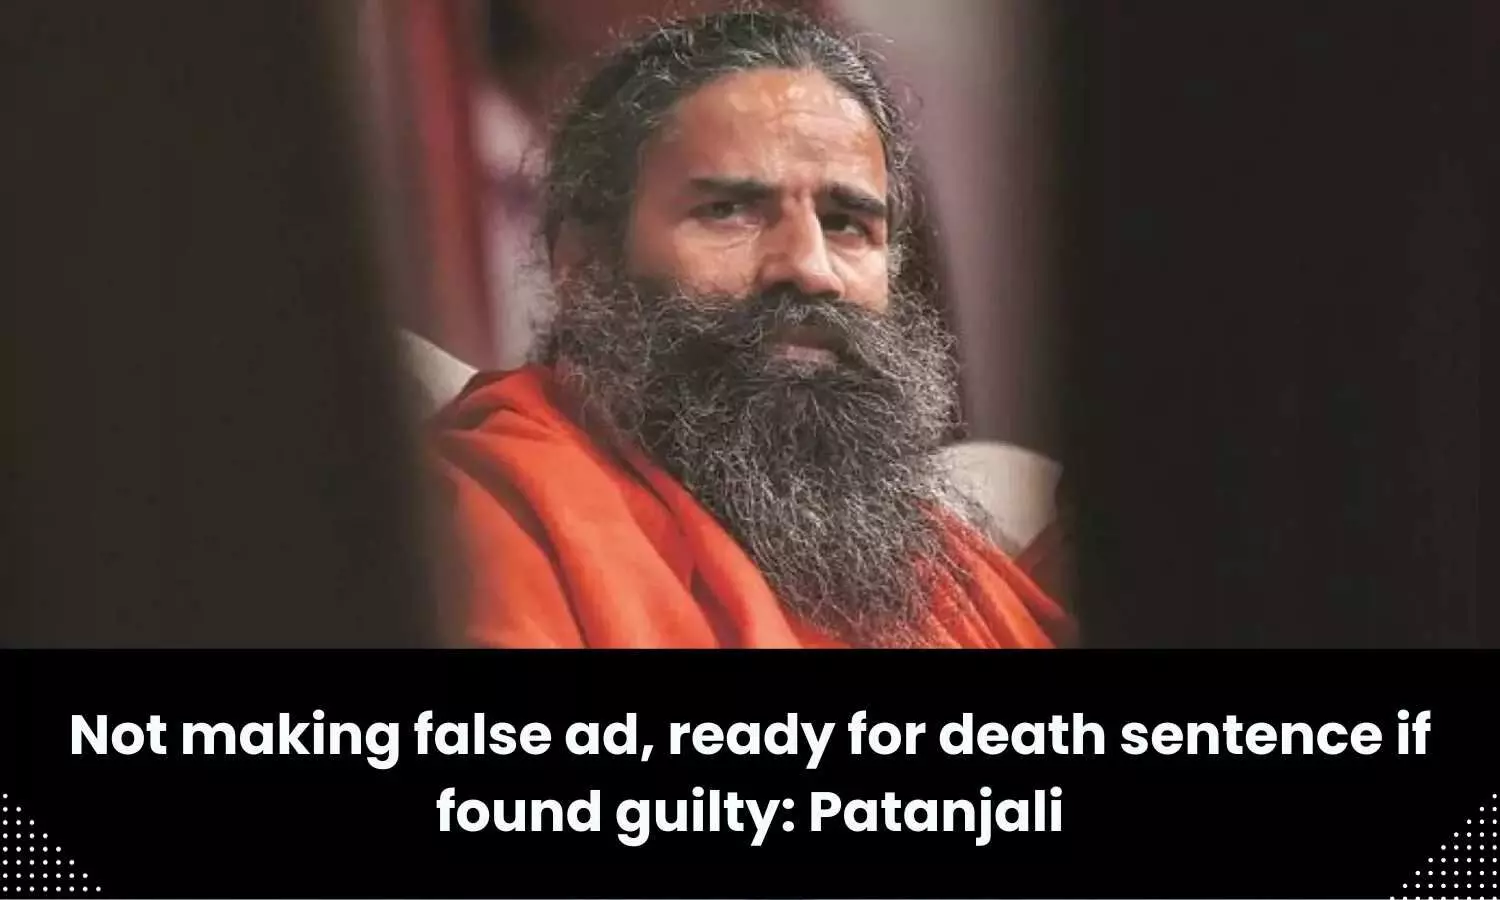 Not making false ad, ready for death sentence if found guilty: Patanjali Ayurved